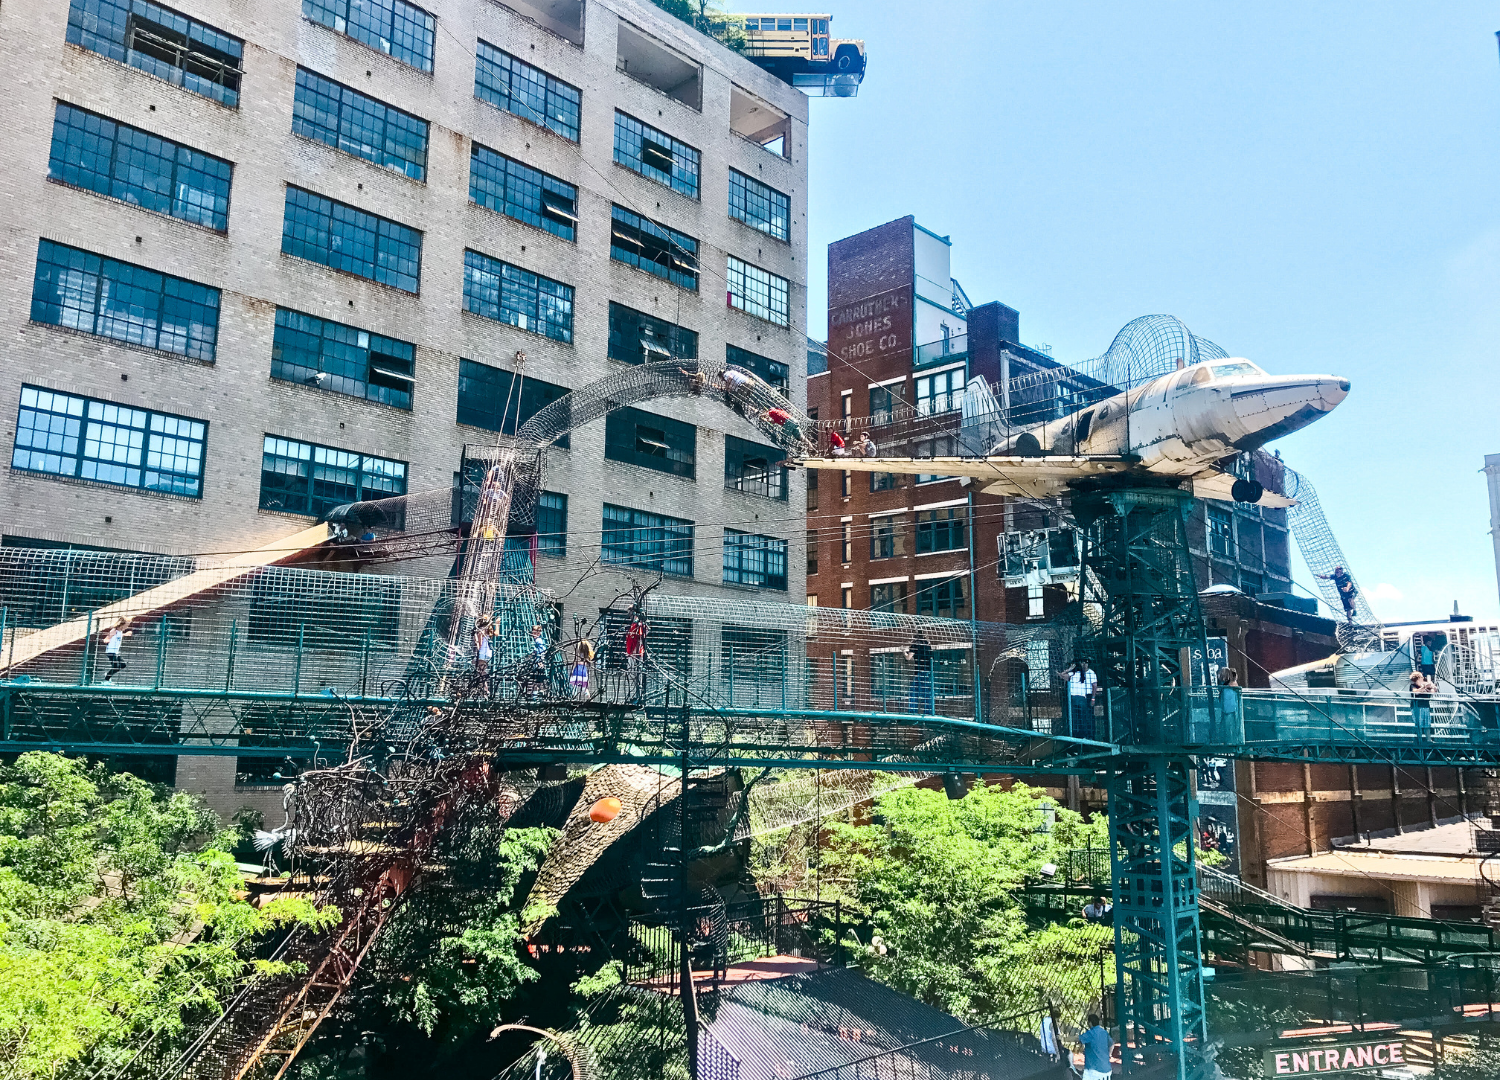 Travel to St. Louis City Museum